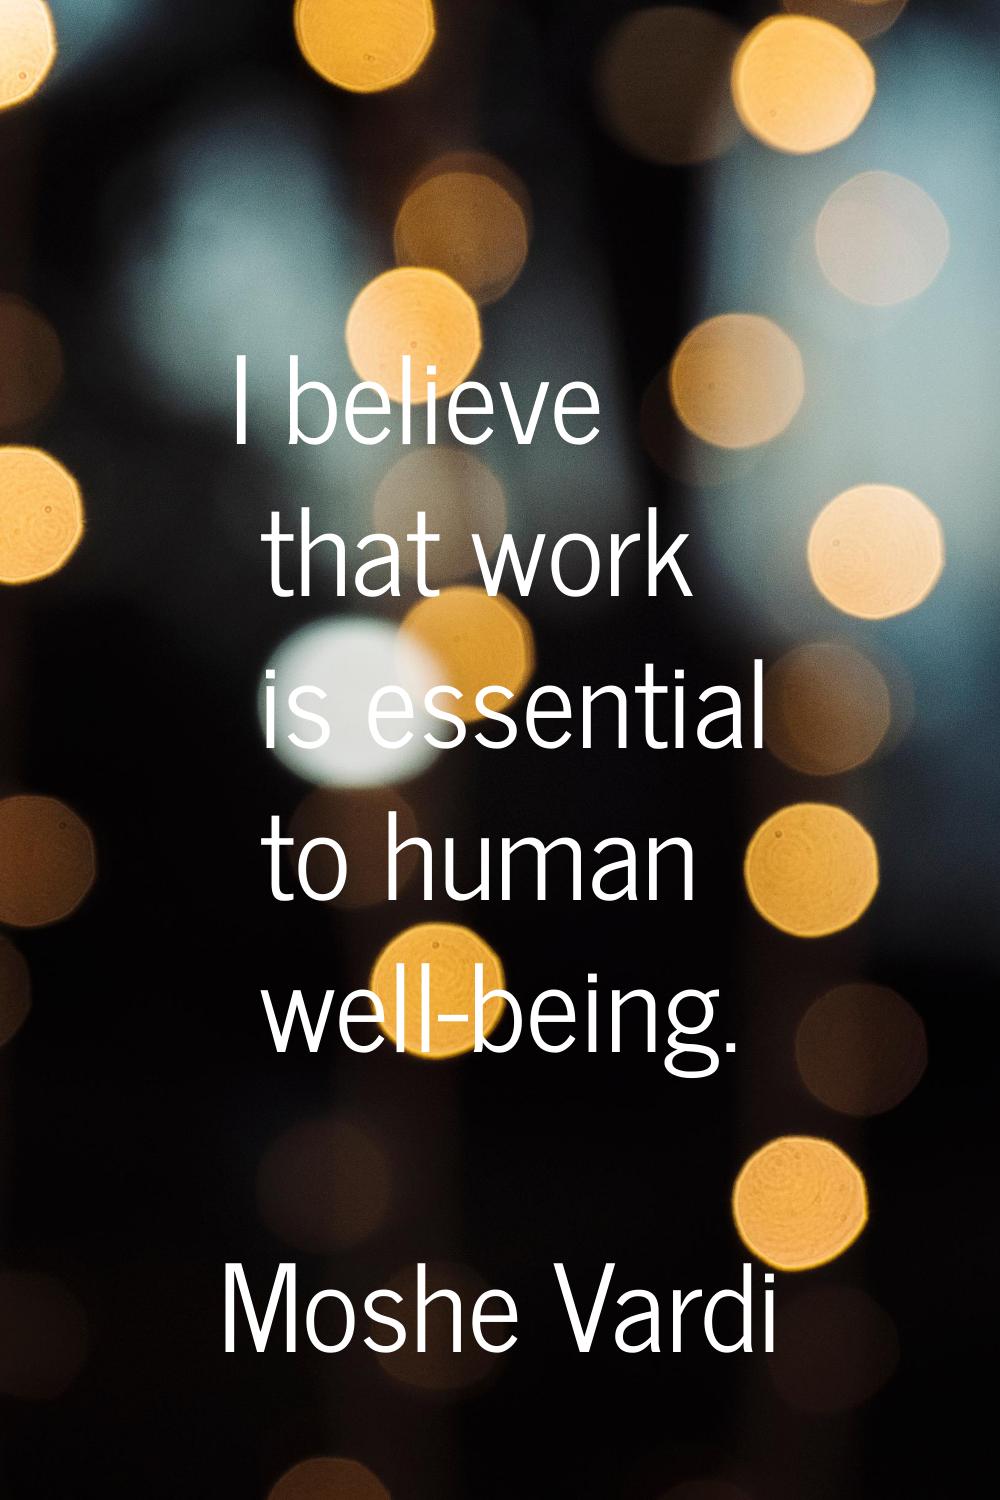 I believe that work is essential to human well-being.